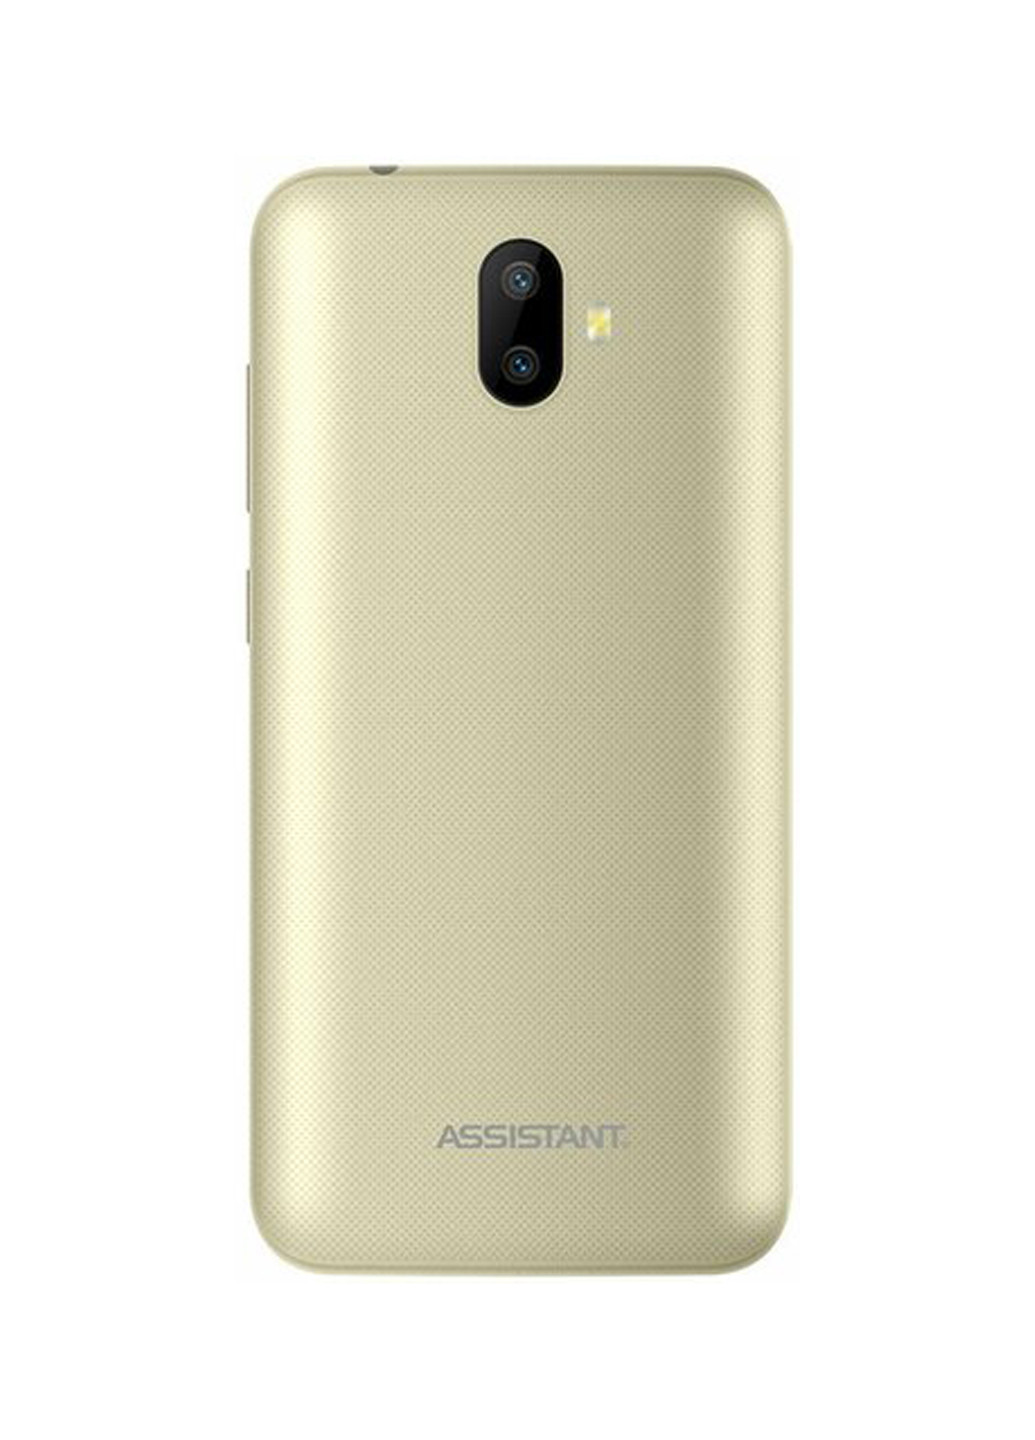 Смартфон ASSISTANT as-503 target 2/16gb gold (131804408)